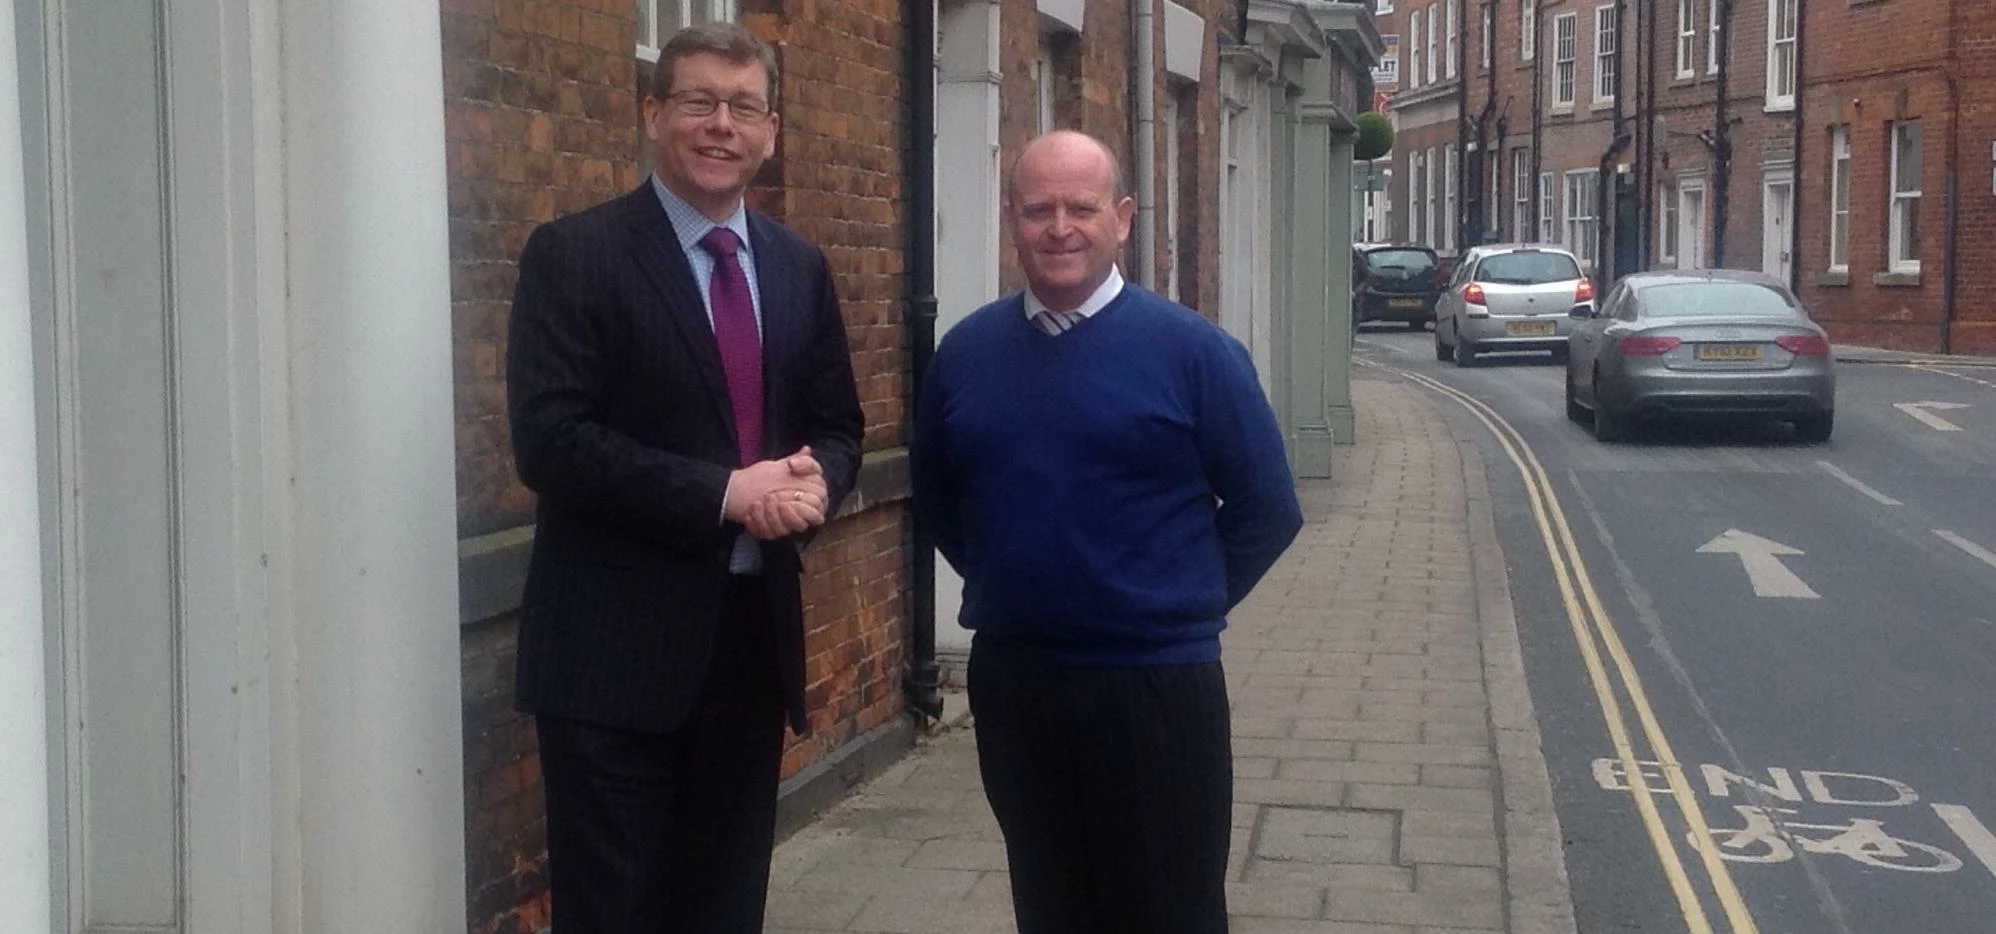 Peter Gibson (left) and Mingus Menzies Baird outside the new Coles Solicitors office in Beverley